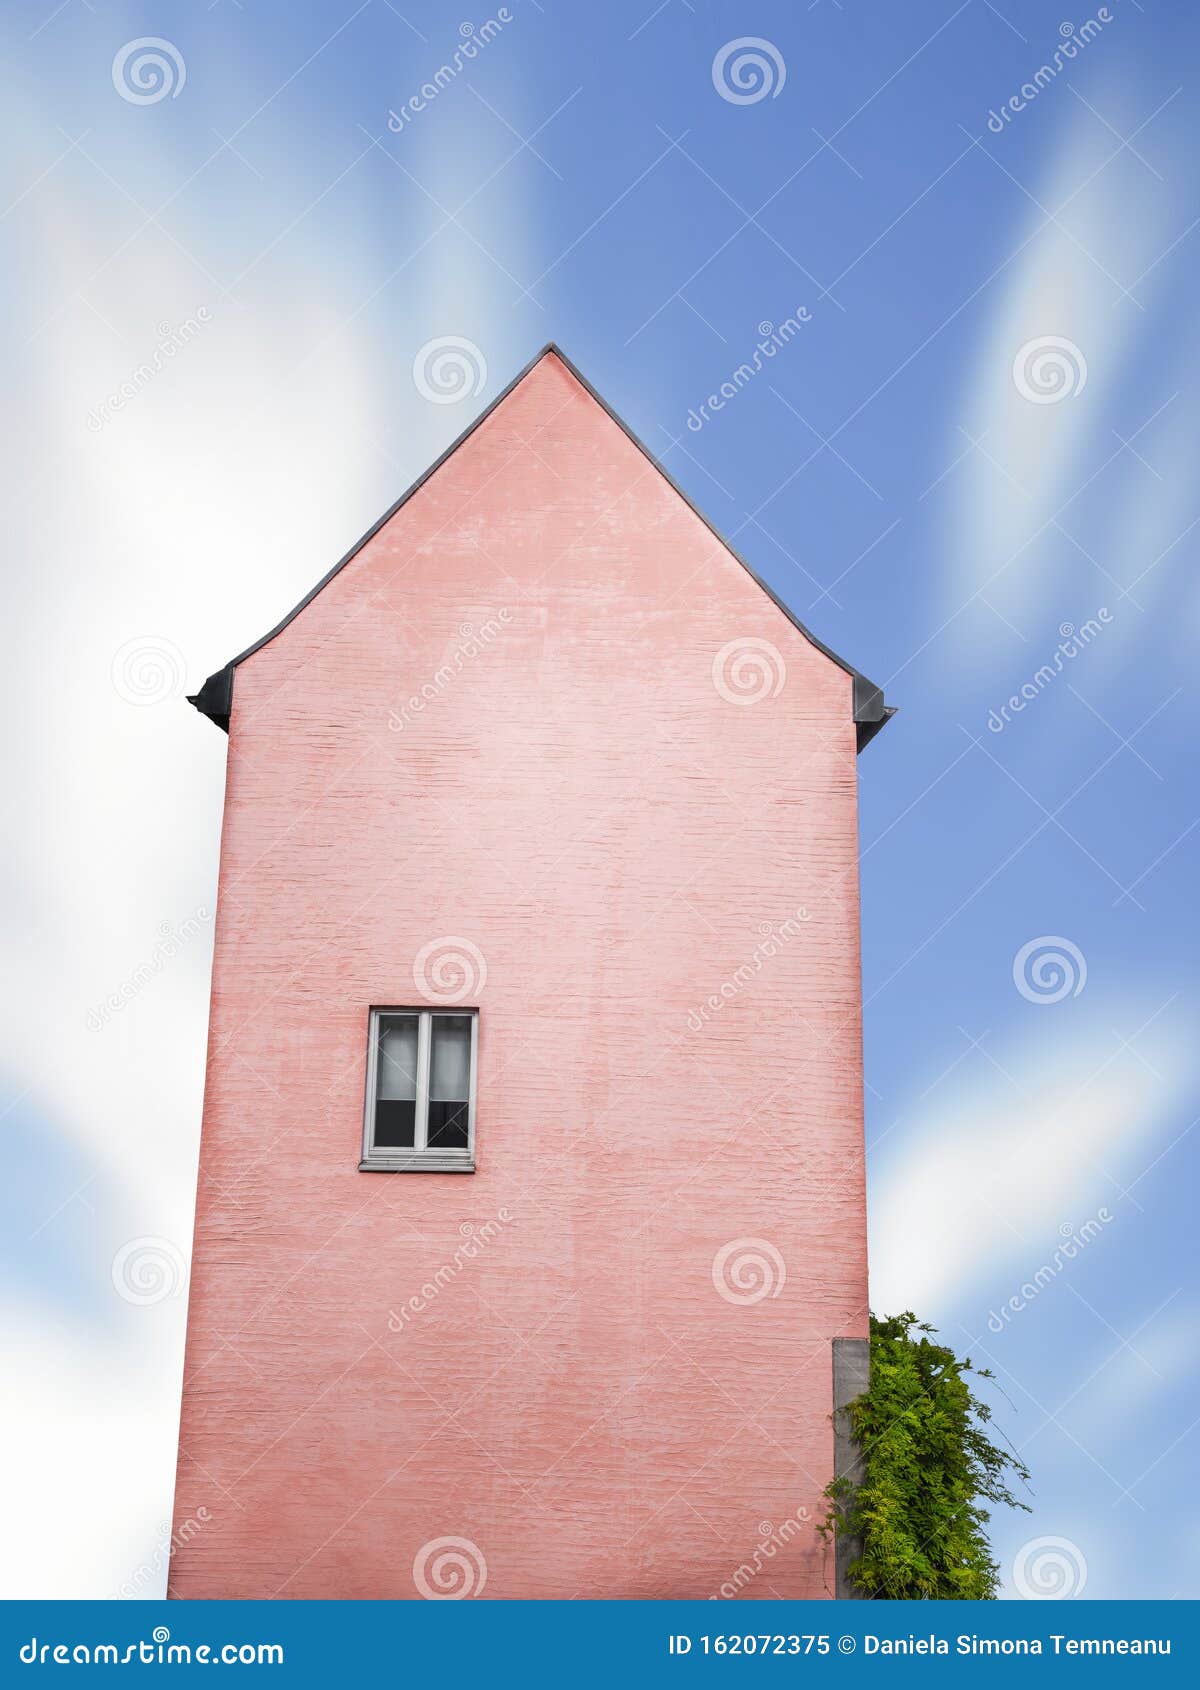 How to Build a Cute Pink House House